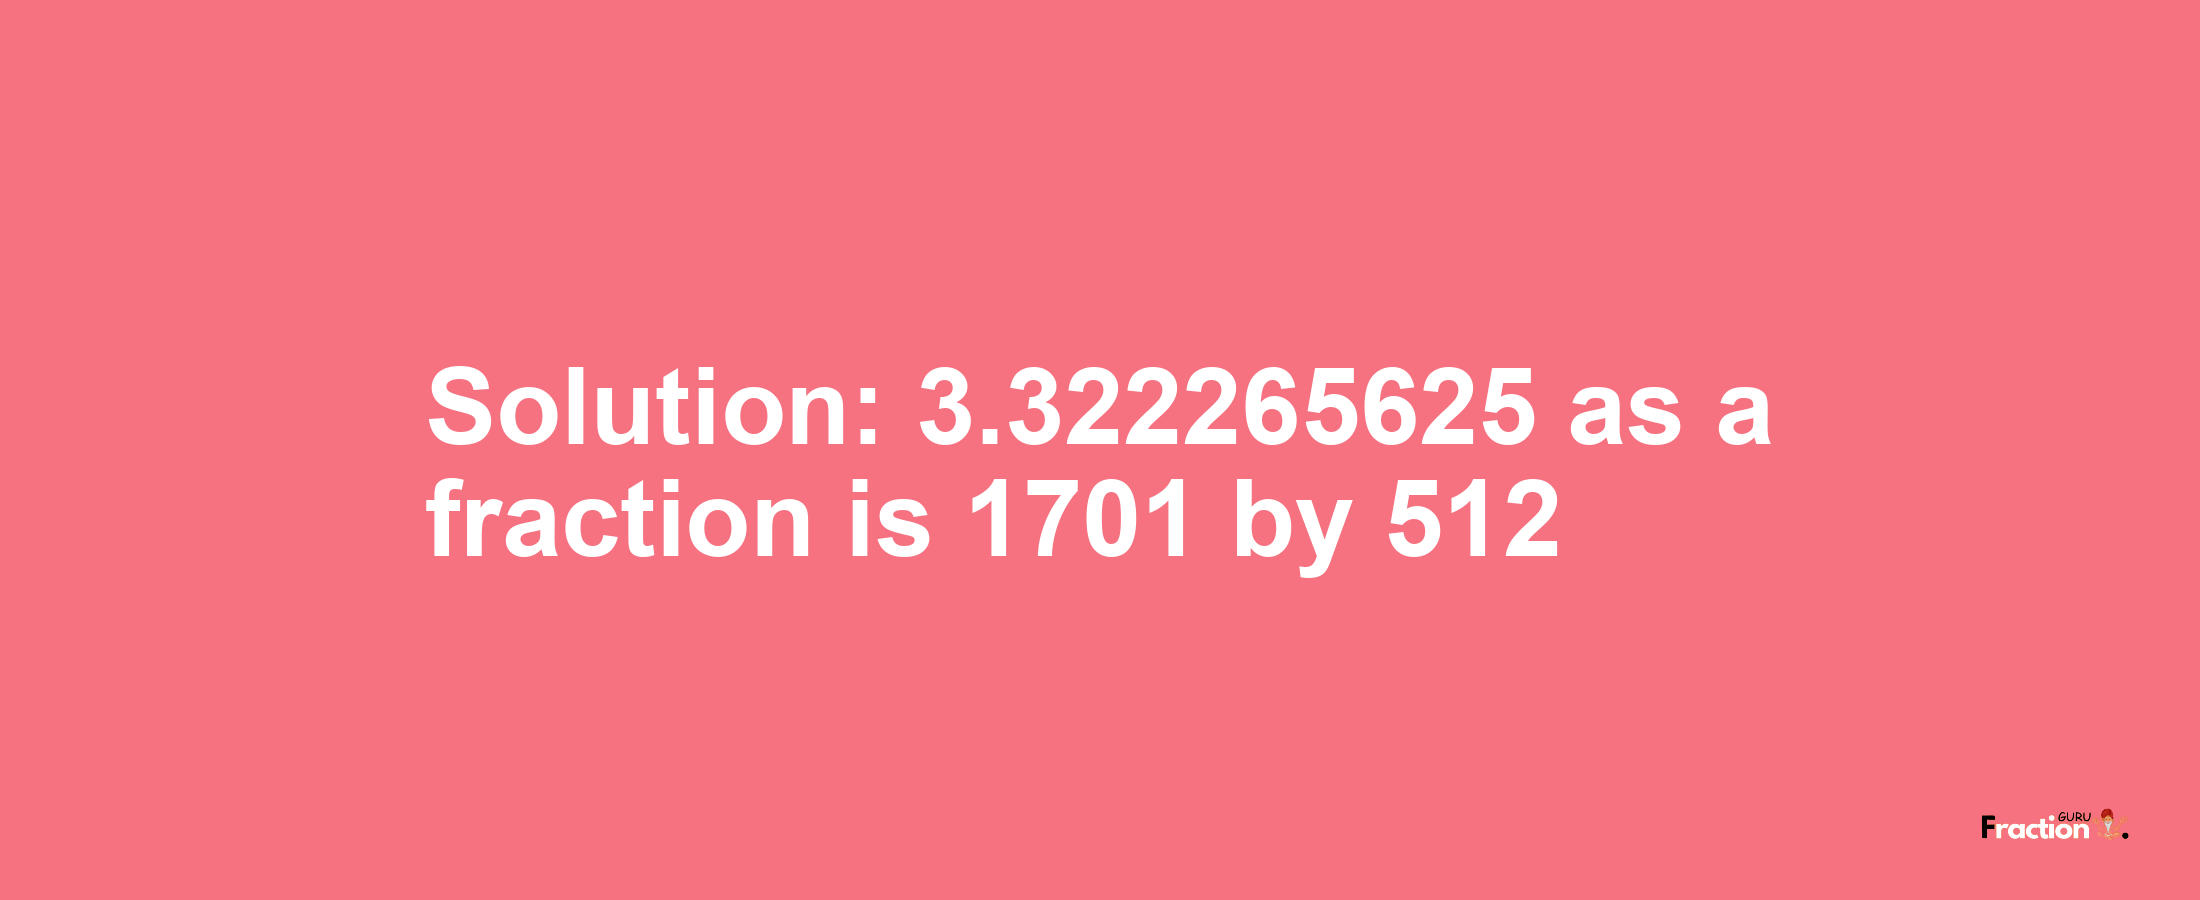 Solution:3.322265625 as a fraction is 1701/512